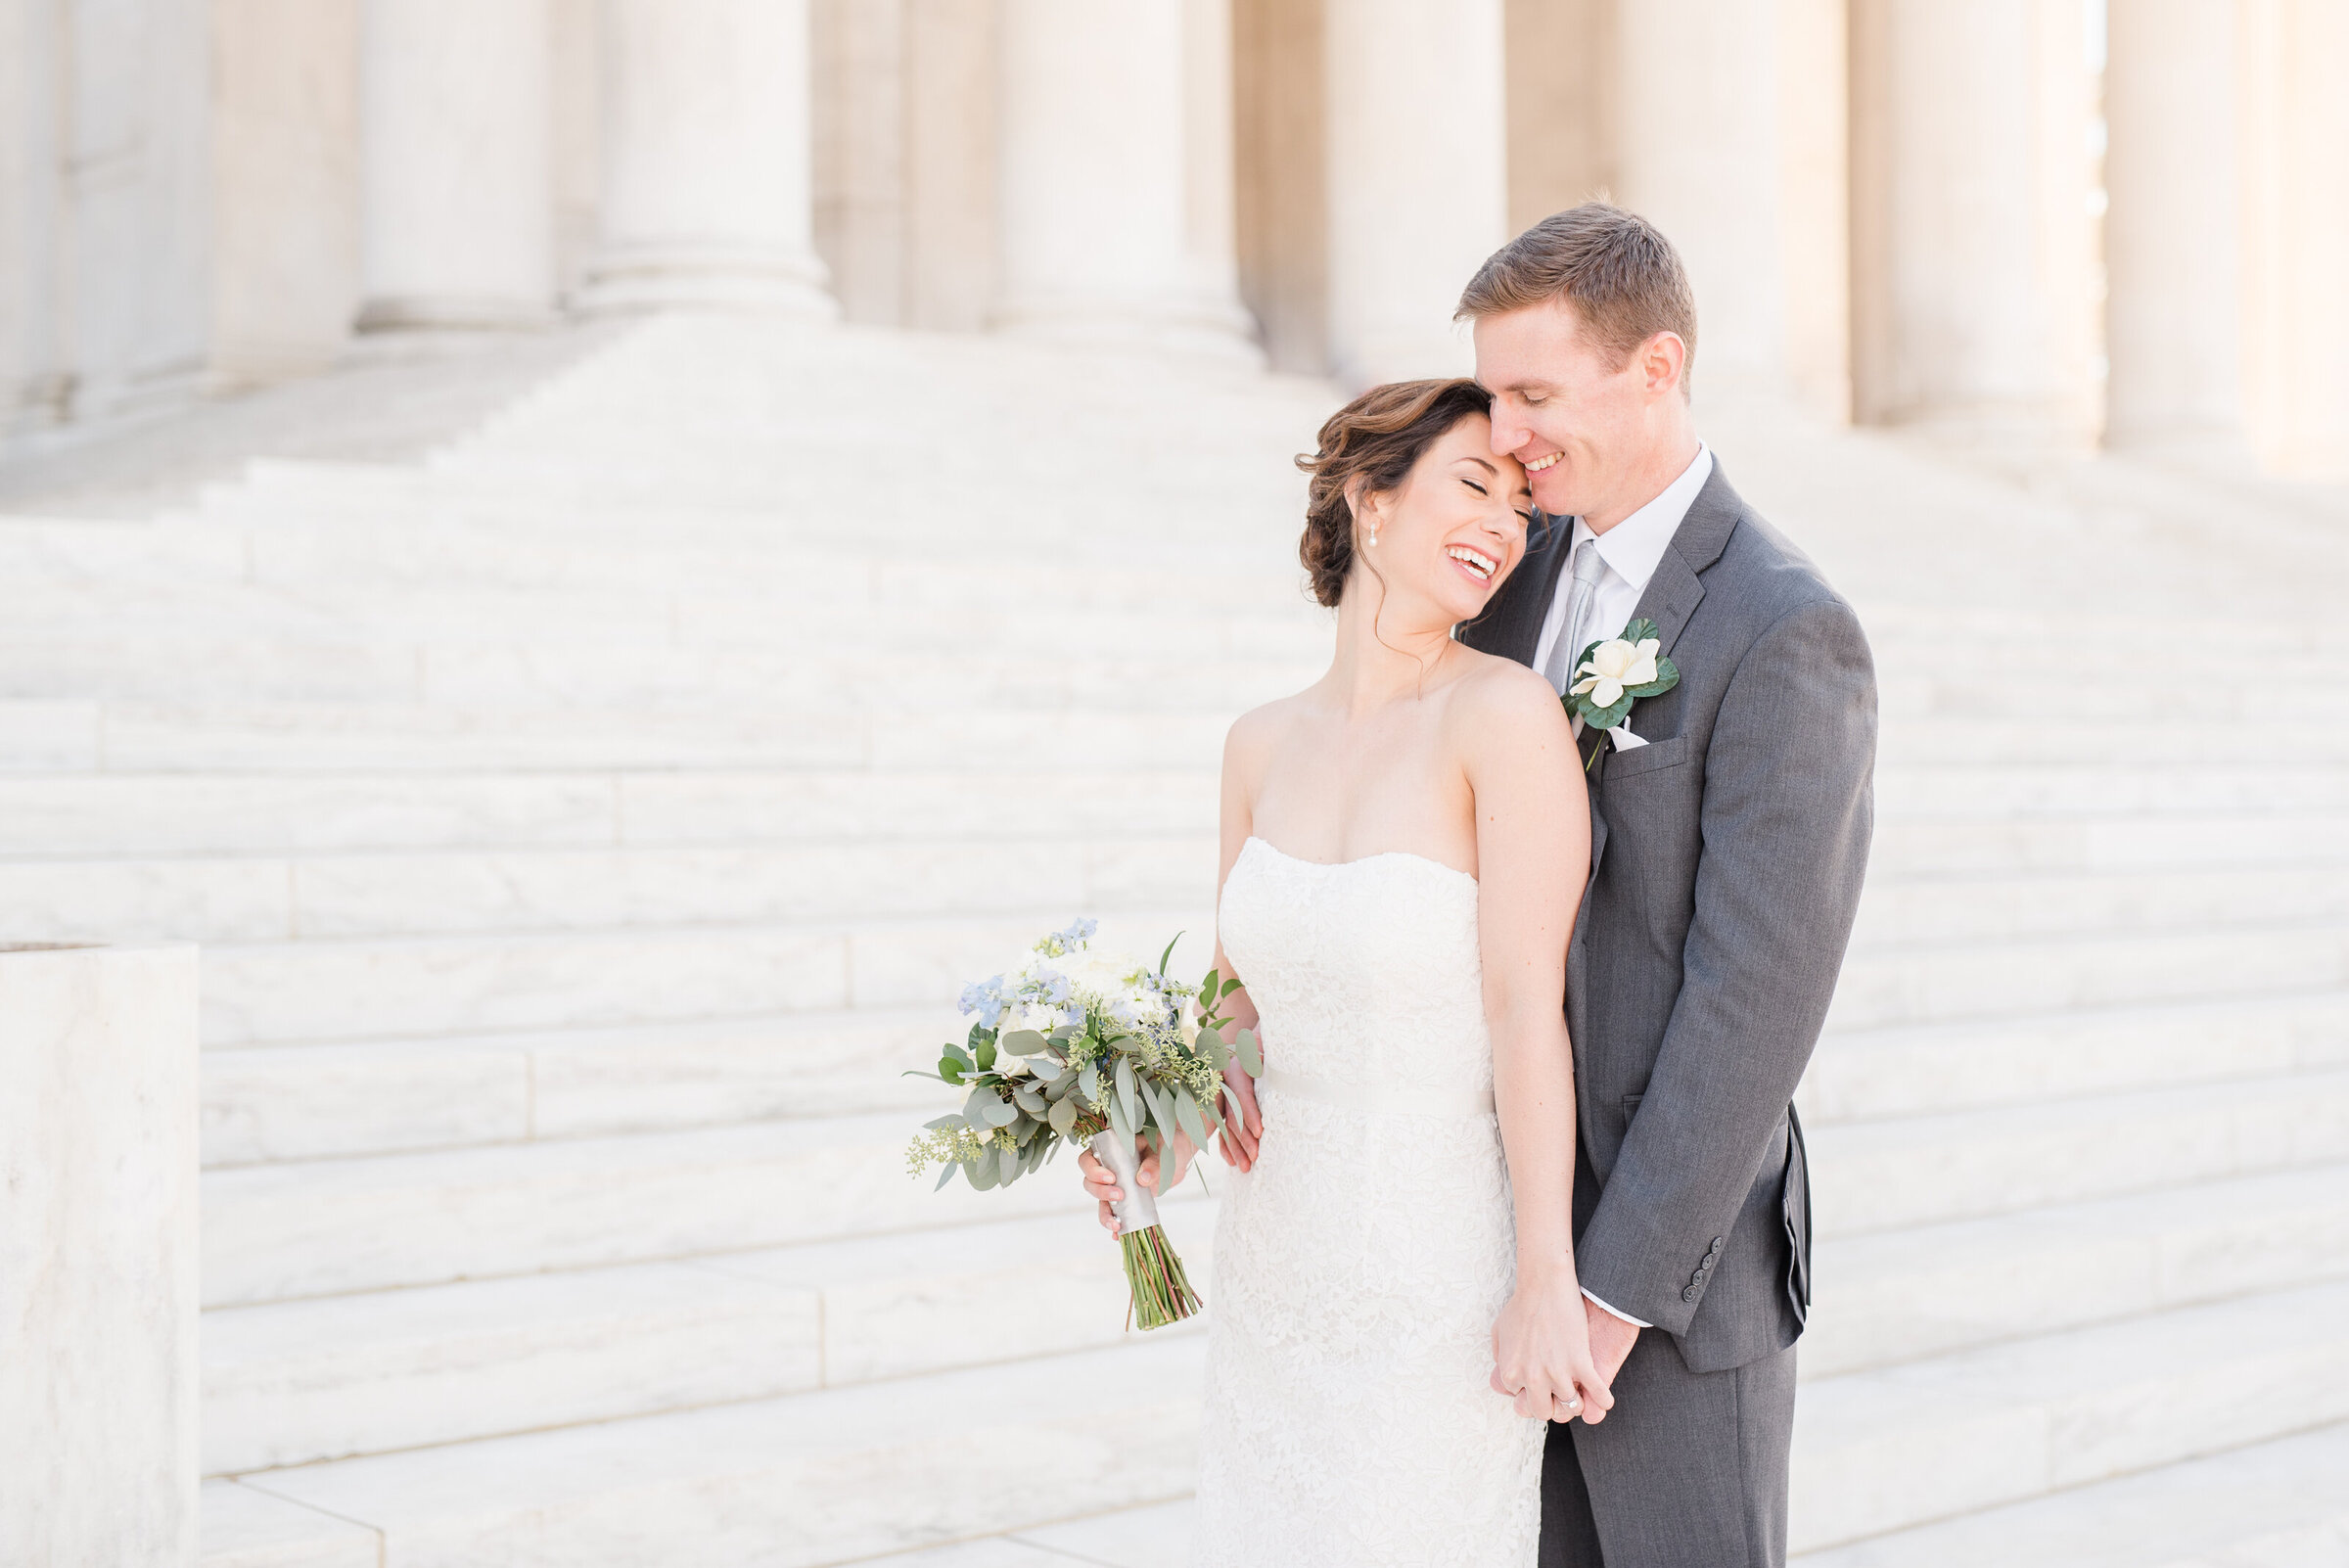 northern virginia wedding monument photography classic formal lincoln memorial decatur house bride and groom -12